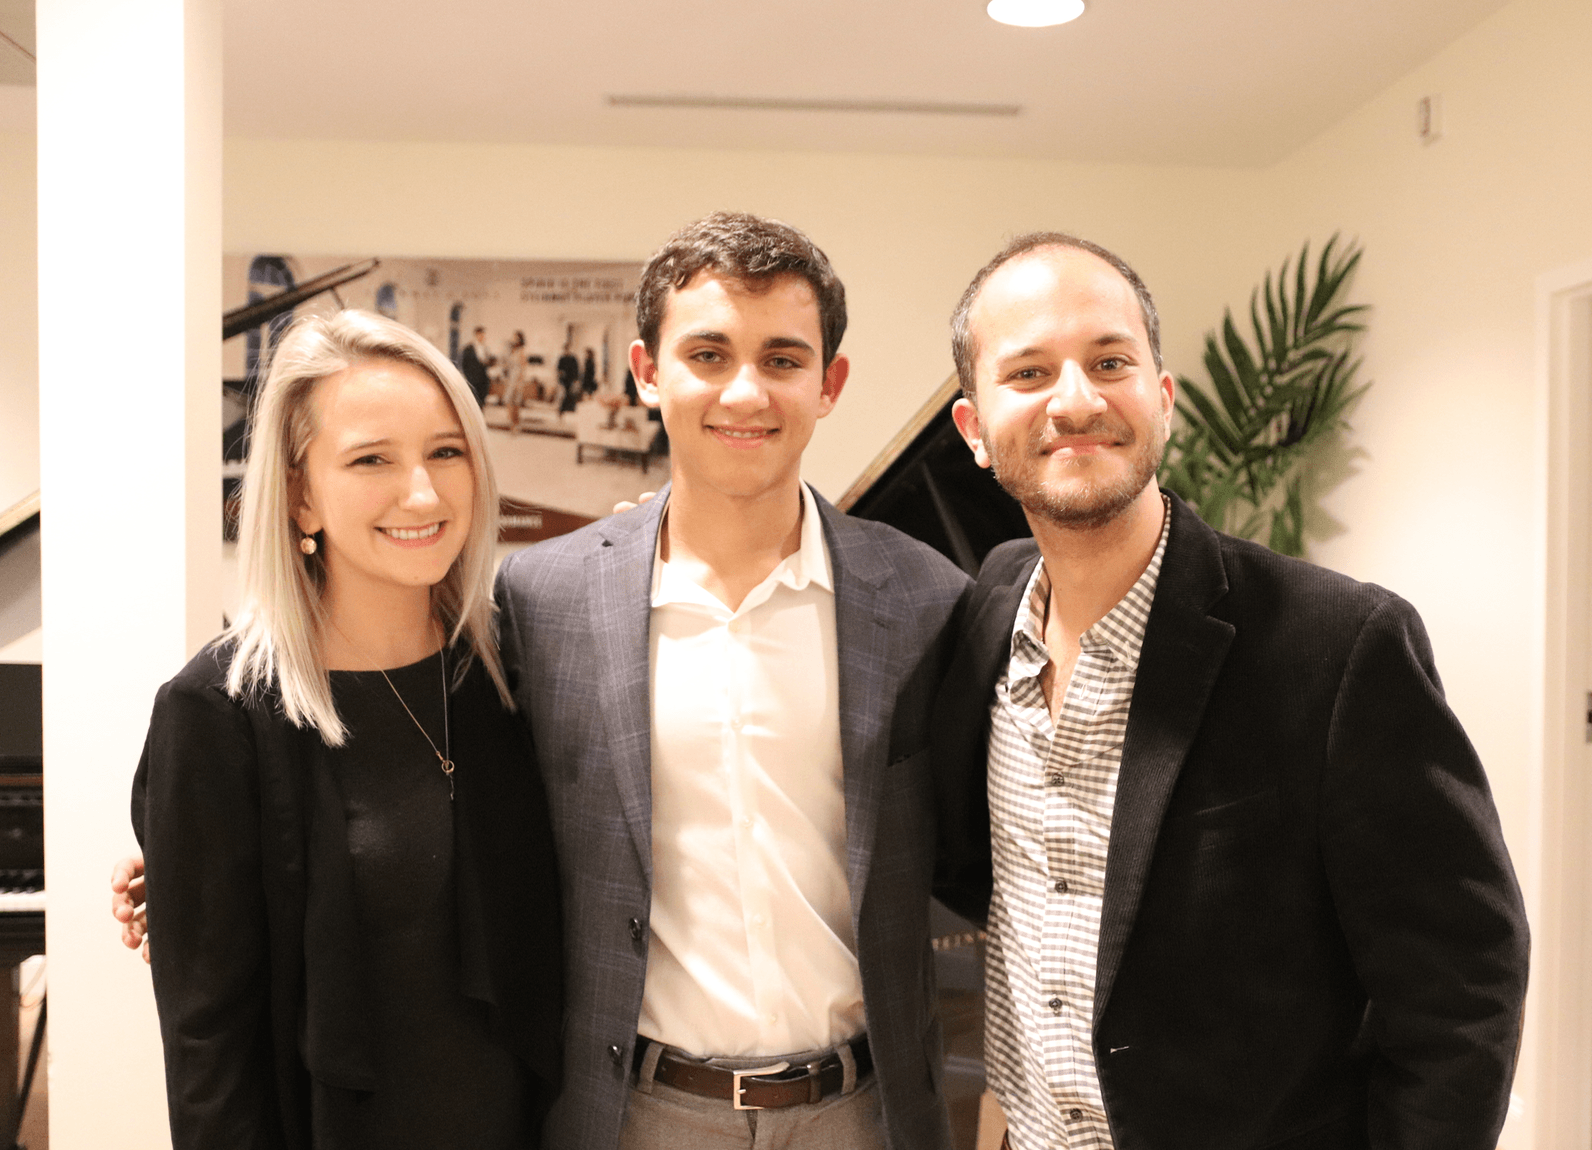 Suzanne from Steinway & Sons, Lucas Gazianis and Itamar Gov-Ari. Oct 21, 2019 Photo: Leslie Yager